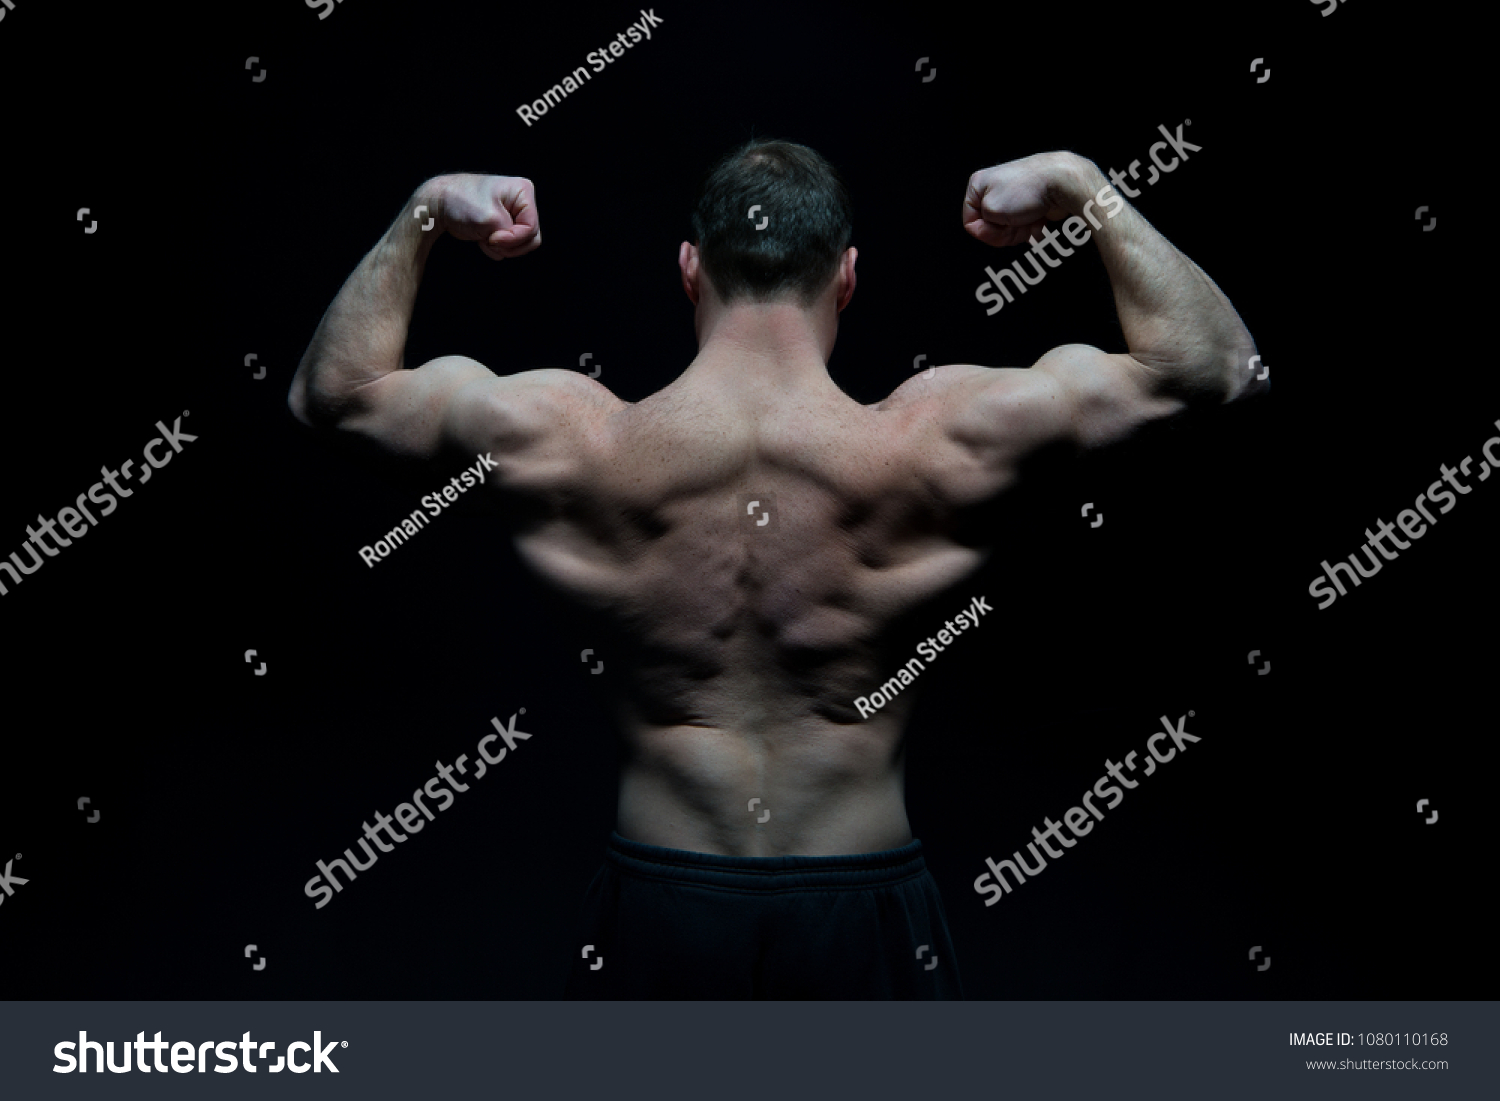 Bodybuilder with fit torso, back view. Man athlete flex arm muscles. Sportsman show biceps and triceps. Workout and training activity in gym. Sport power and bodycare concept. #1080110168